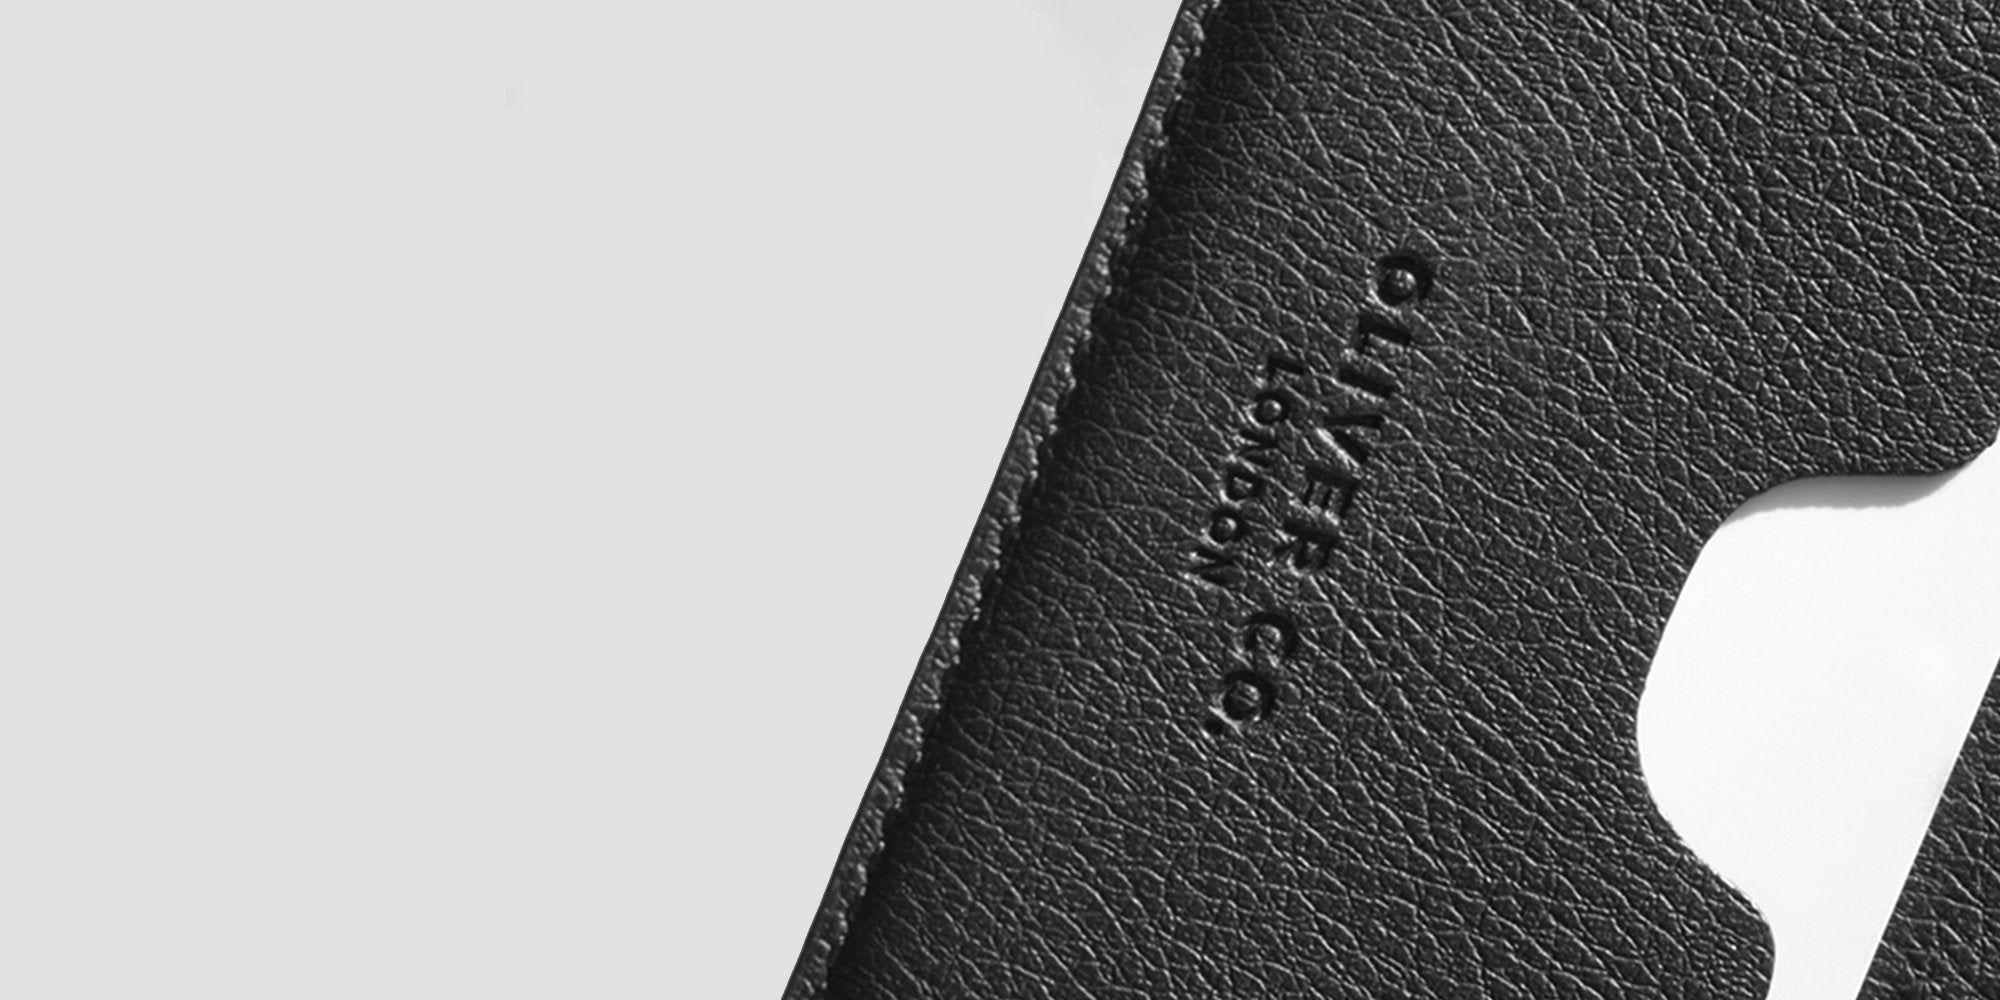 How durable is Vegan Leather?